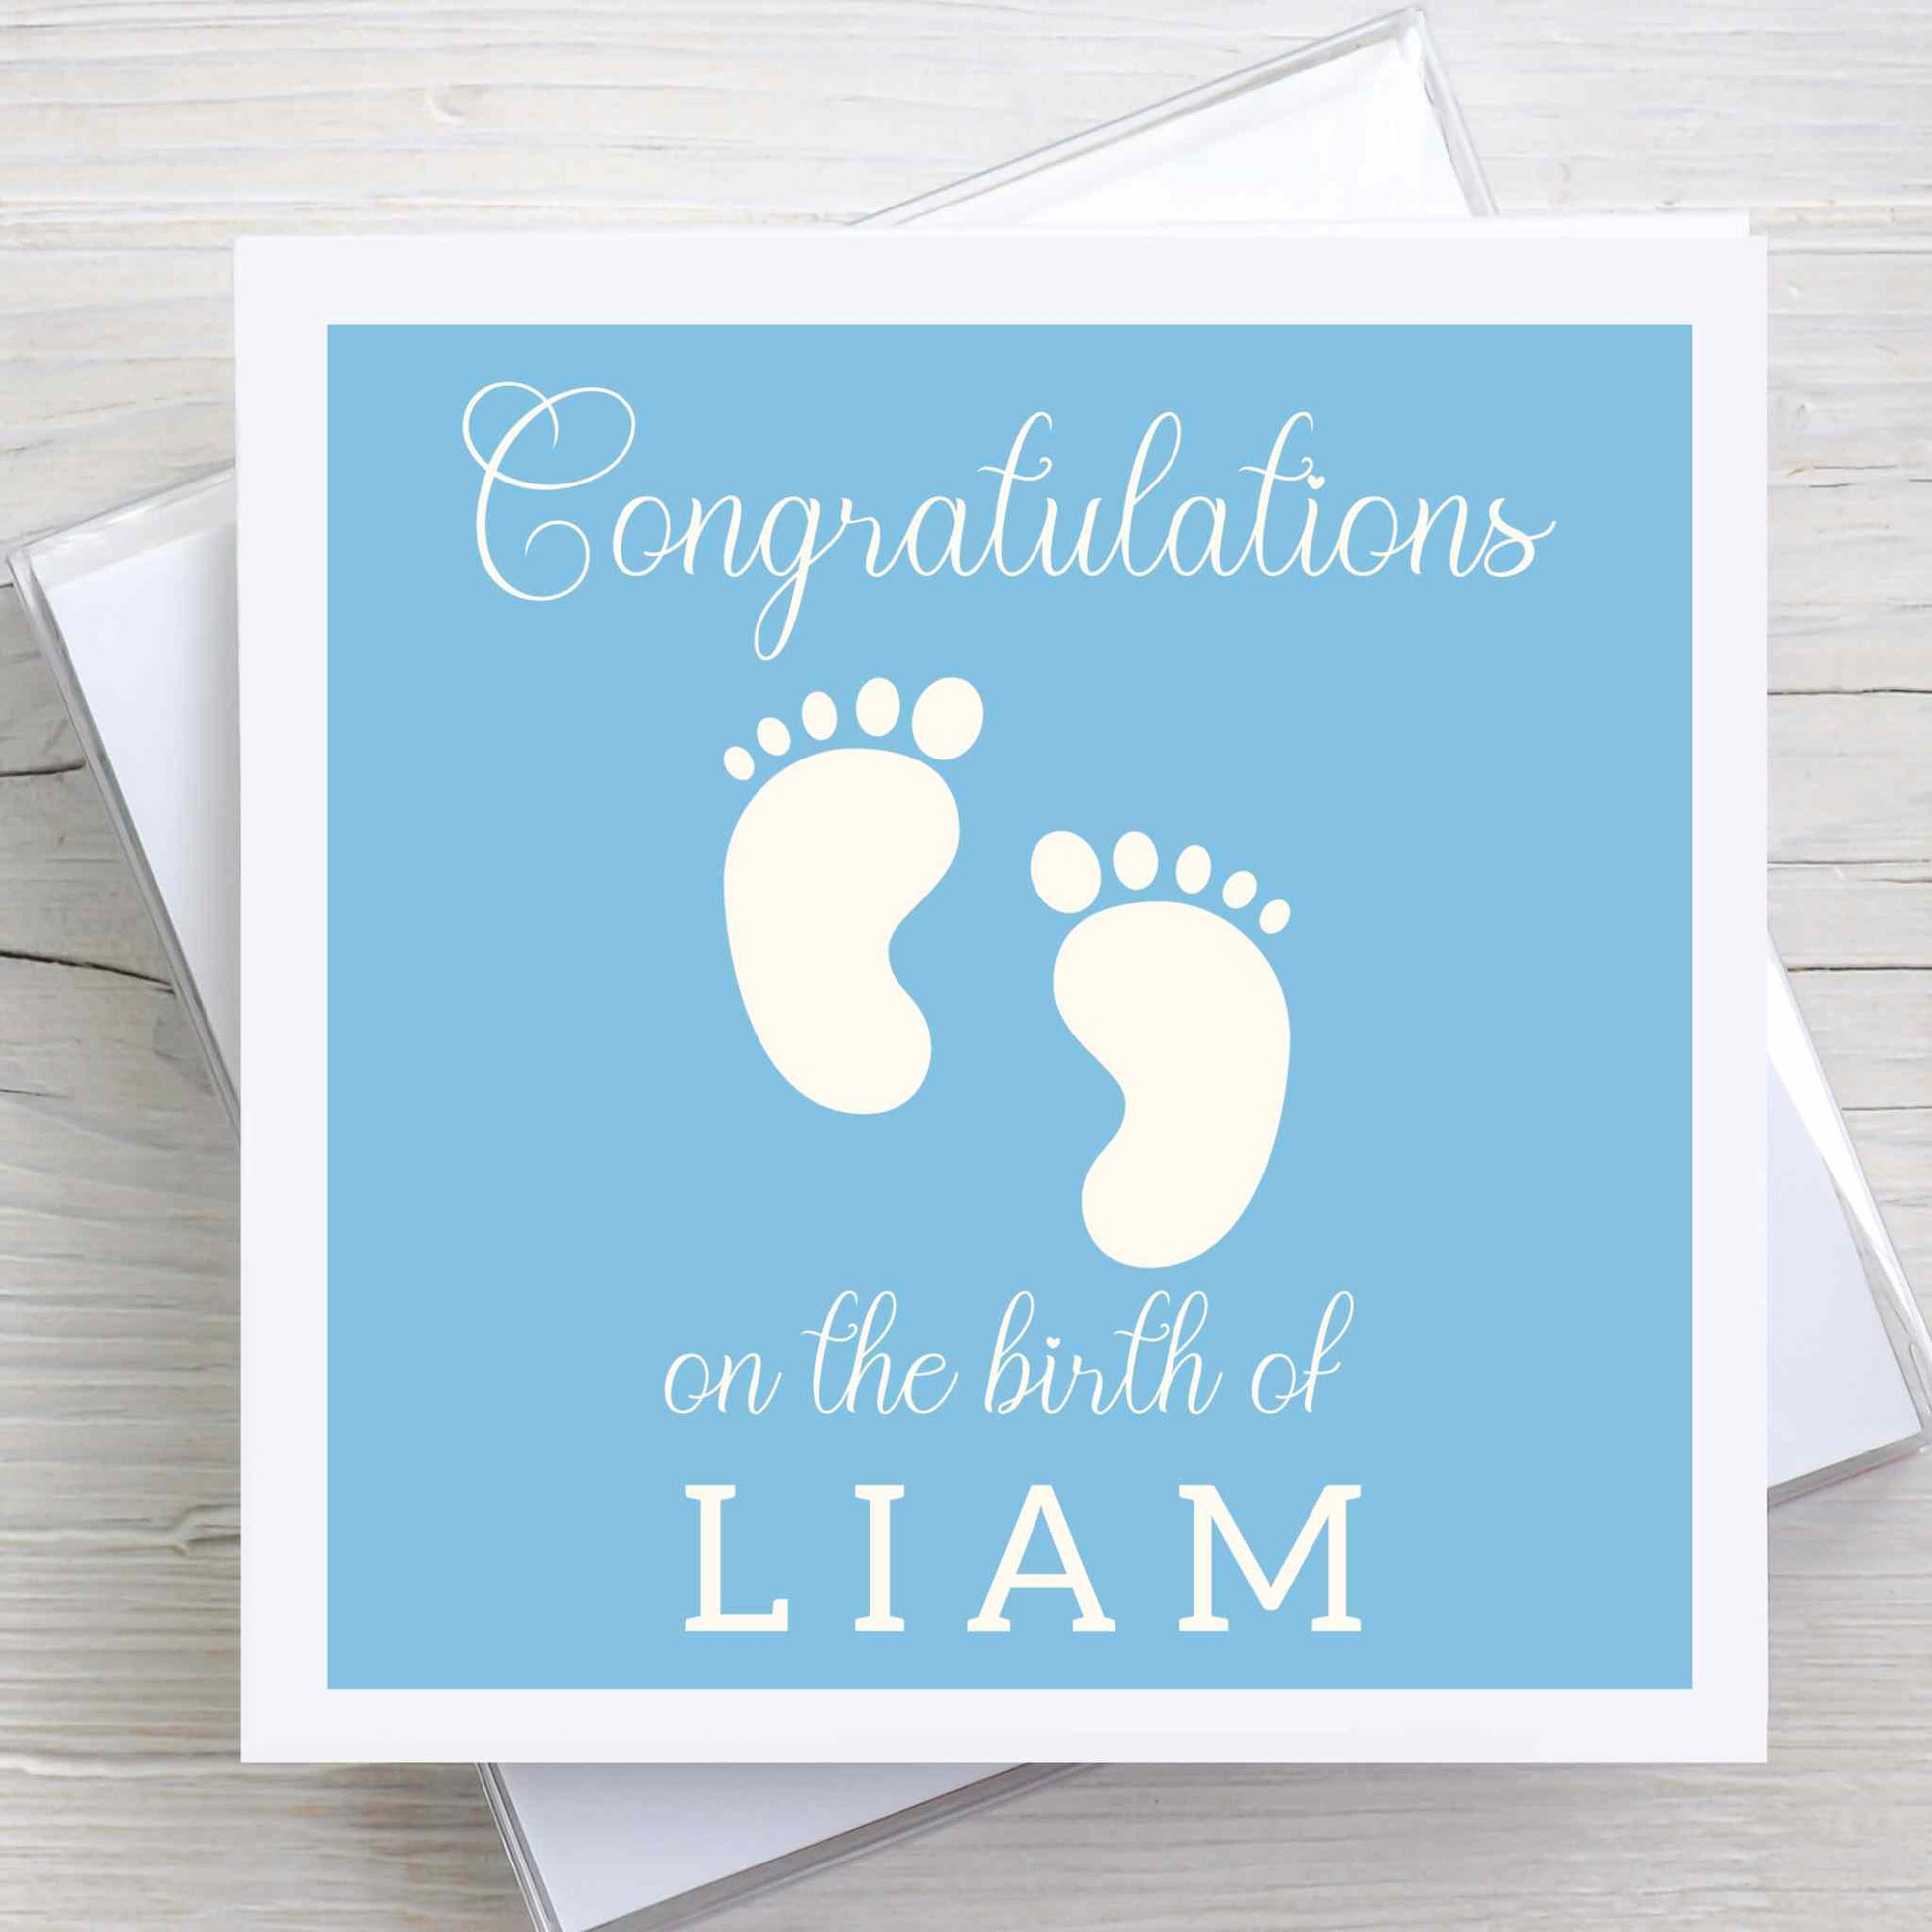 New baby congratulations card featuring baby feet design. Baby name on front. Blue coloured background.